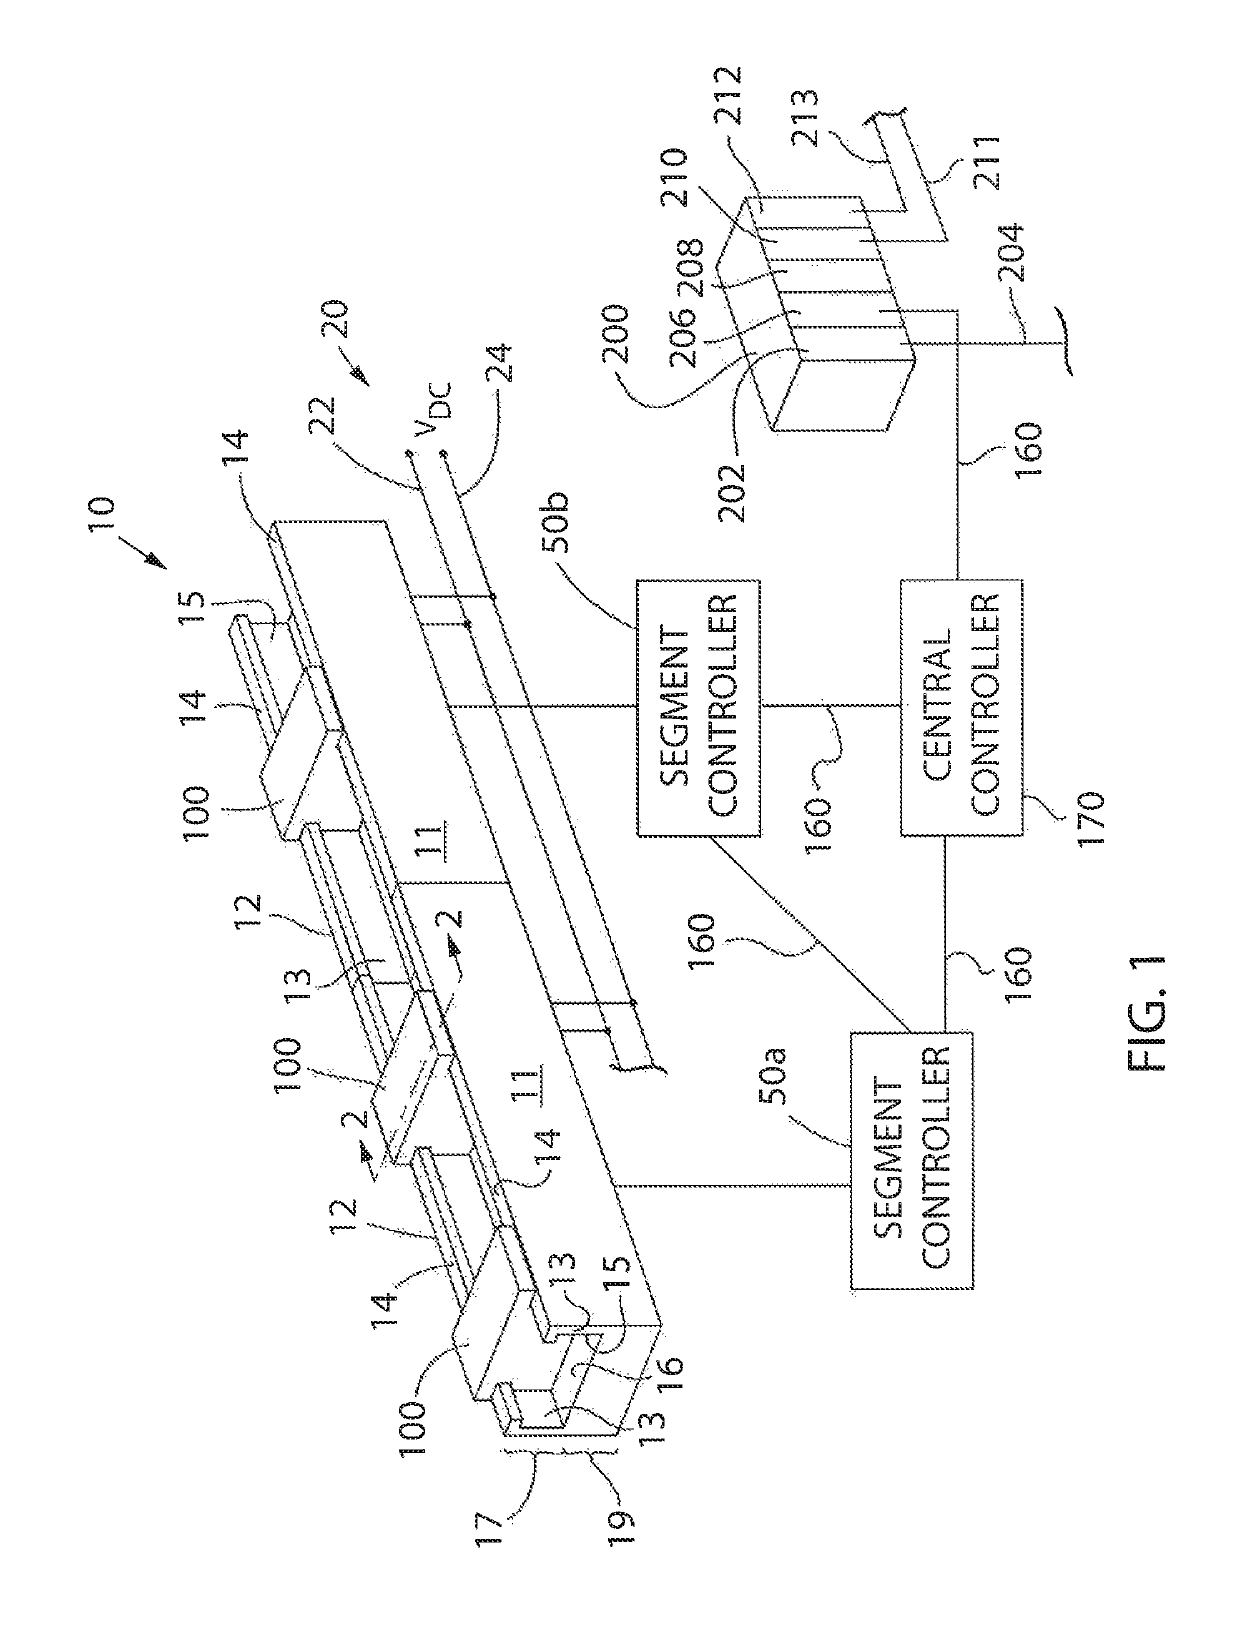 Linear drive system having central, distributed and group control